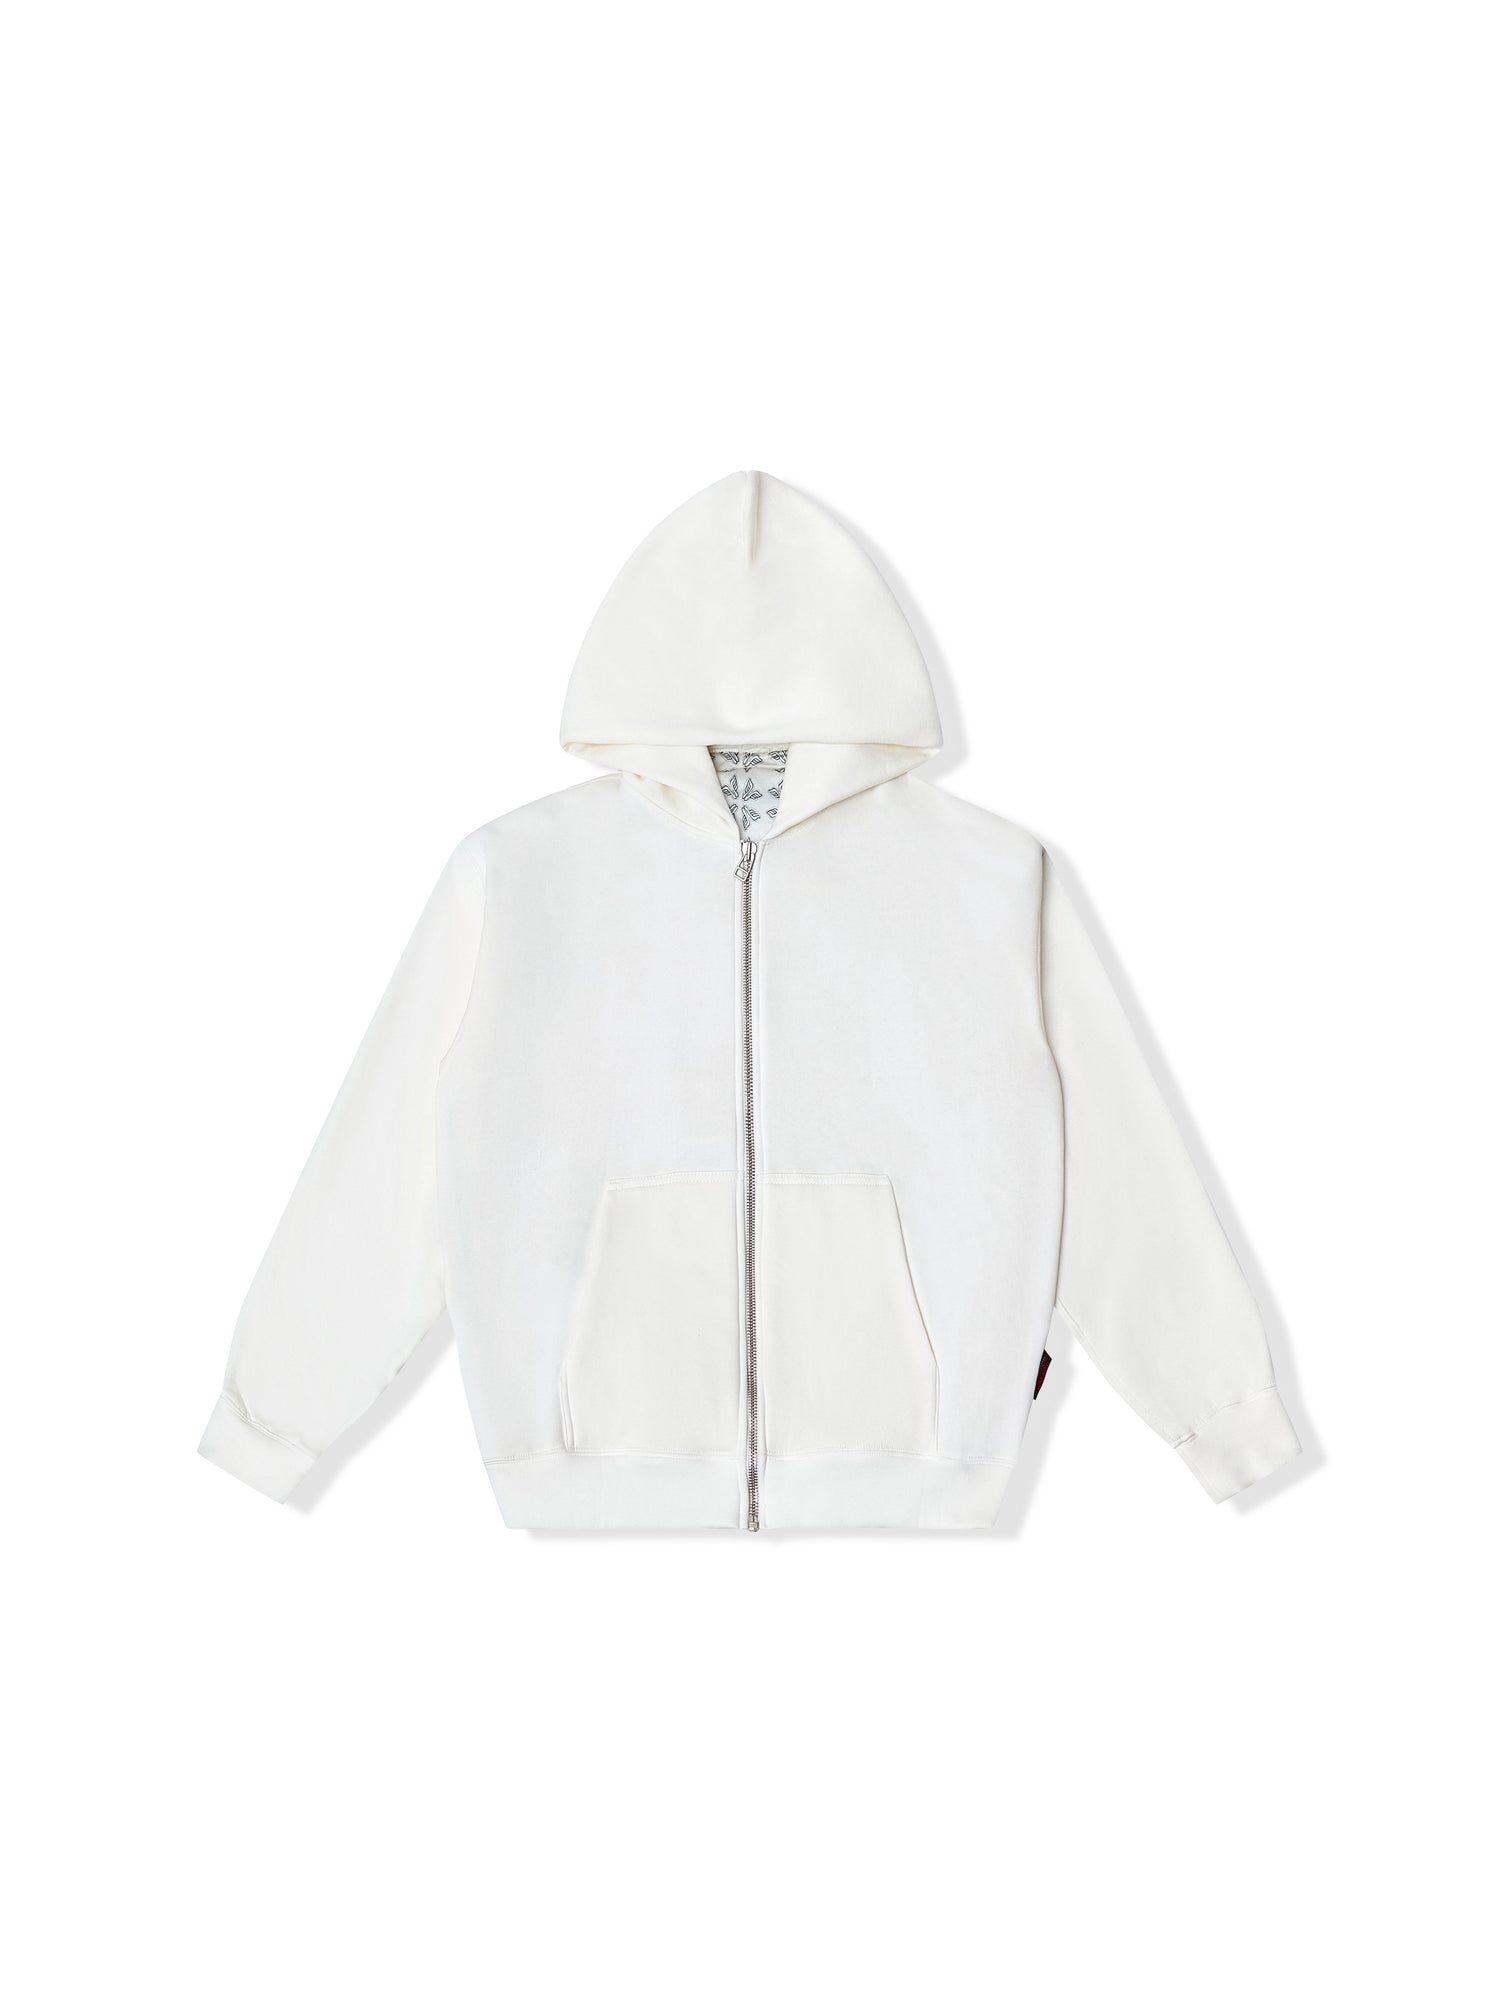 HOODIE ZIP OVERSIZE ANGEL COUTURE WHITE